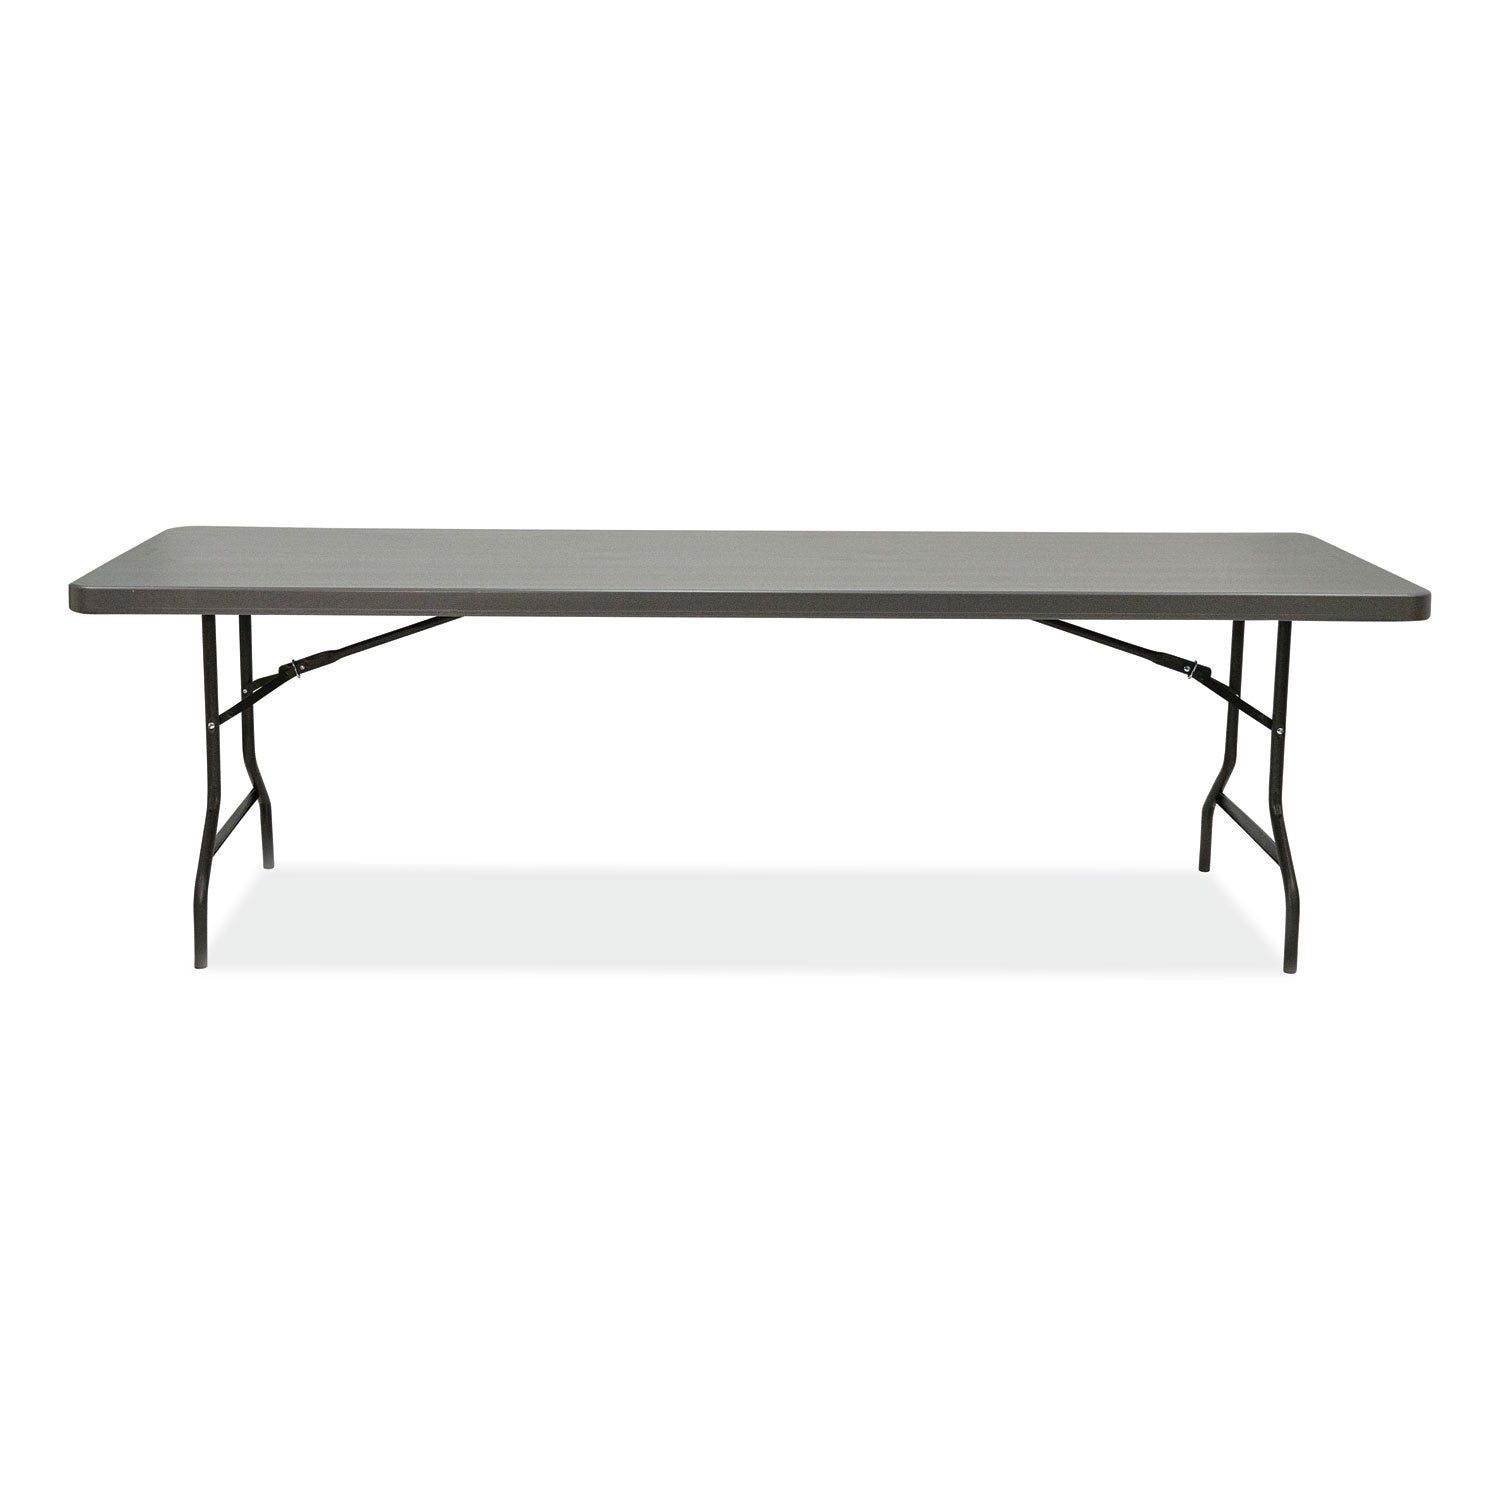 indestructable-commercial-folding-table-rectangular-96-x-30-x-29-charcoal-top-charcoal-base-legs_ice65537 - 4